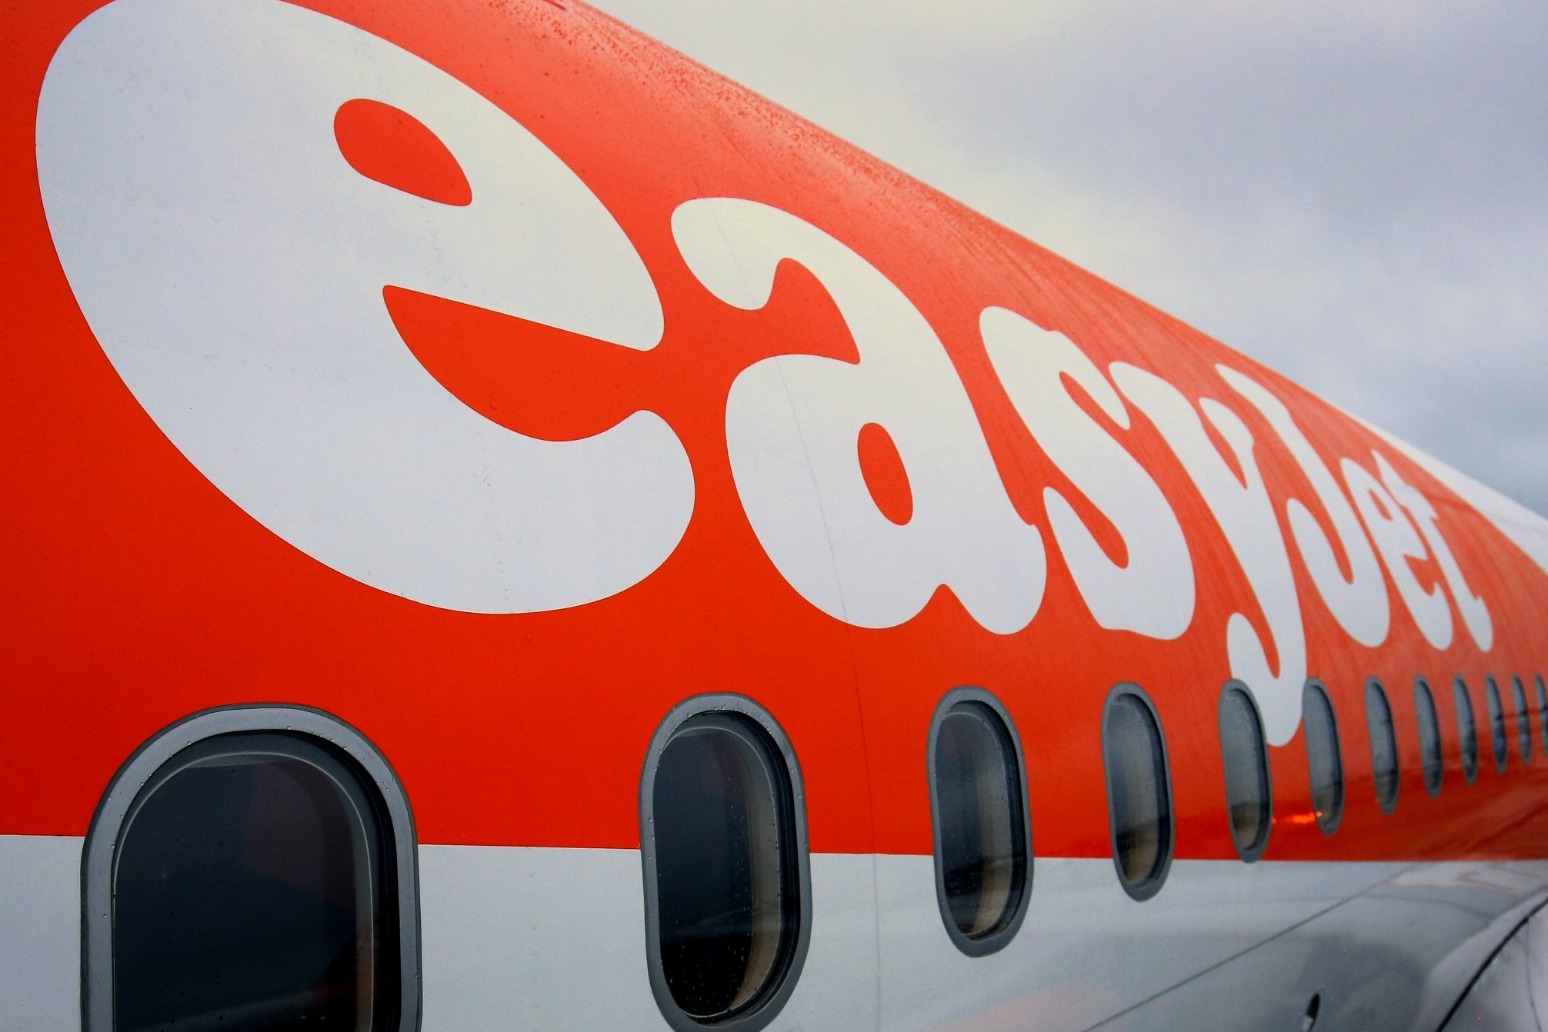 EasyJet hopes to be back to nearly full capacity by end of financial year 